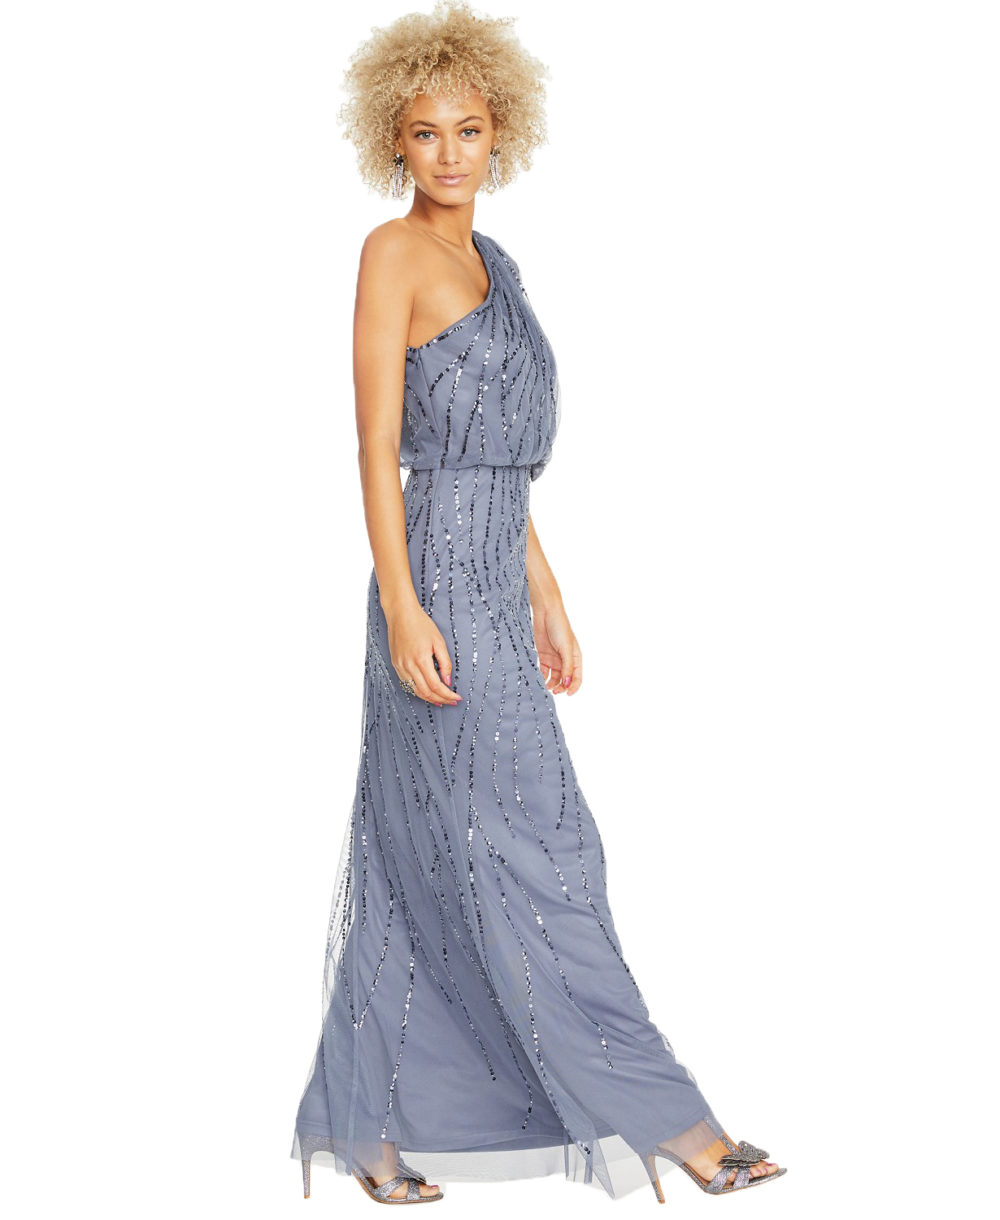 woocommerce-673321-2209615.cloudwaysapps.com-adrianna-papell-womens-dusty-blue-sequined-one-shoulder-gown-dress